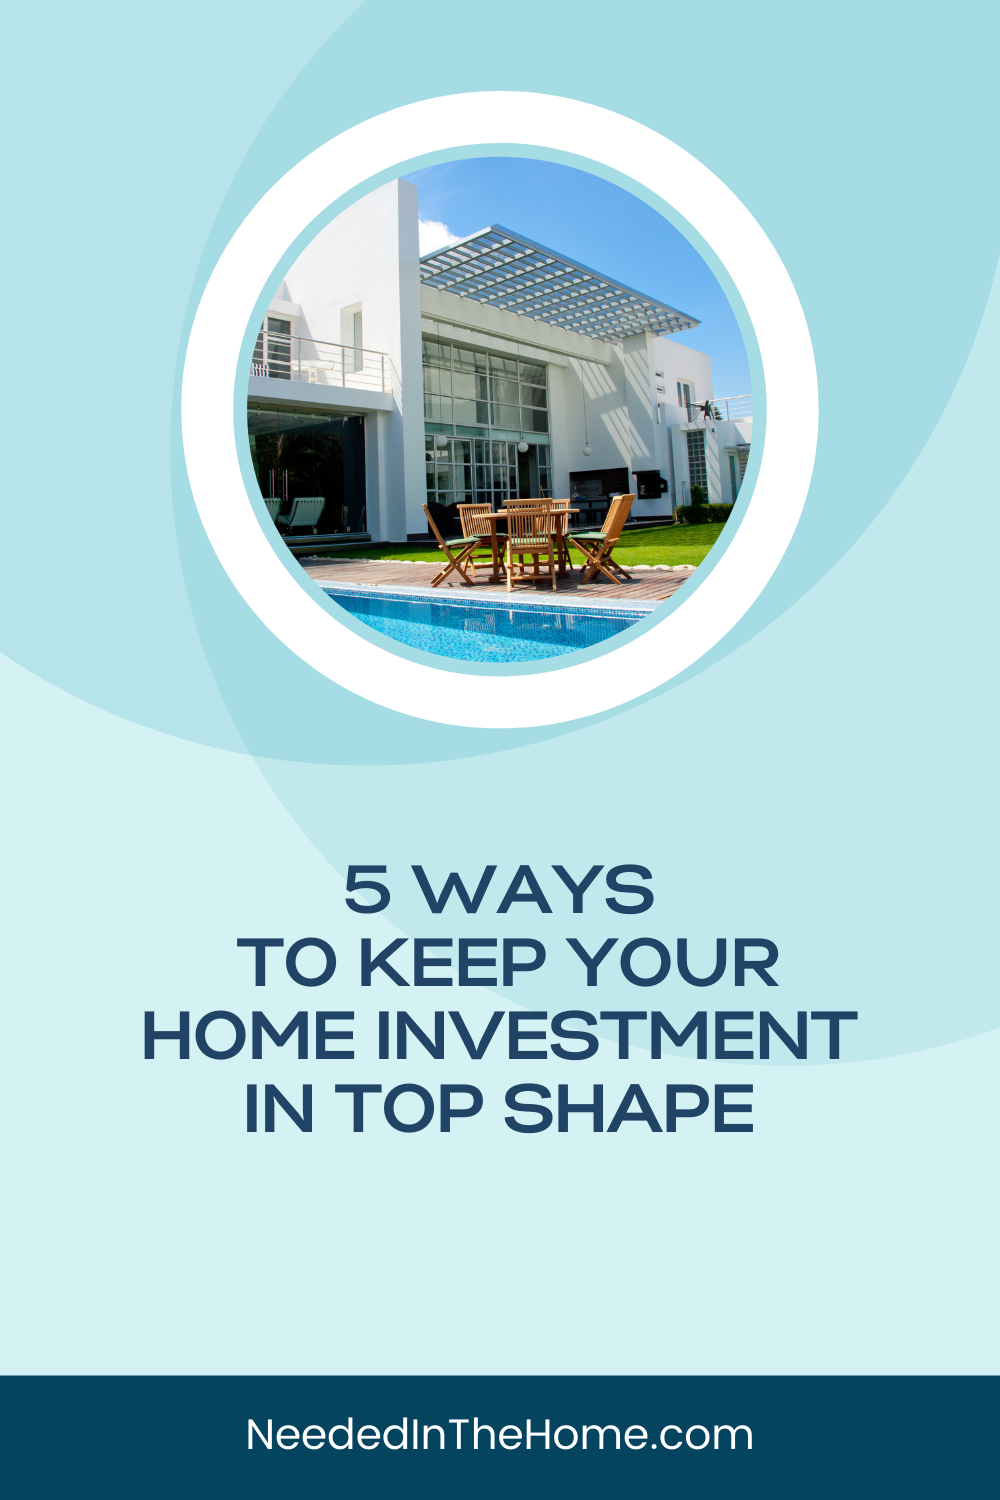 pinterest-pin-description 5 ways to keep your home investment in top shape outside view of home's backyard pool deck chairs table neededinthehome